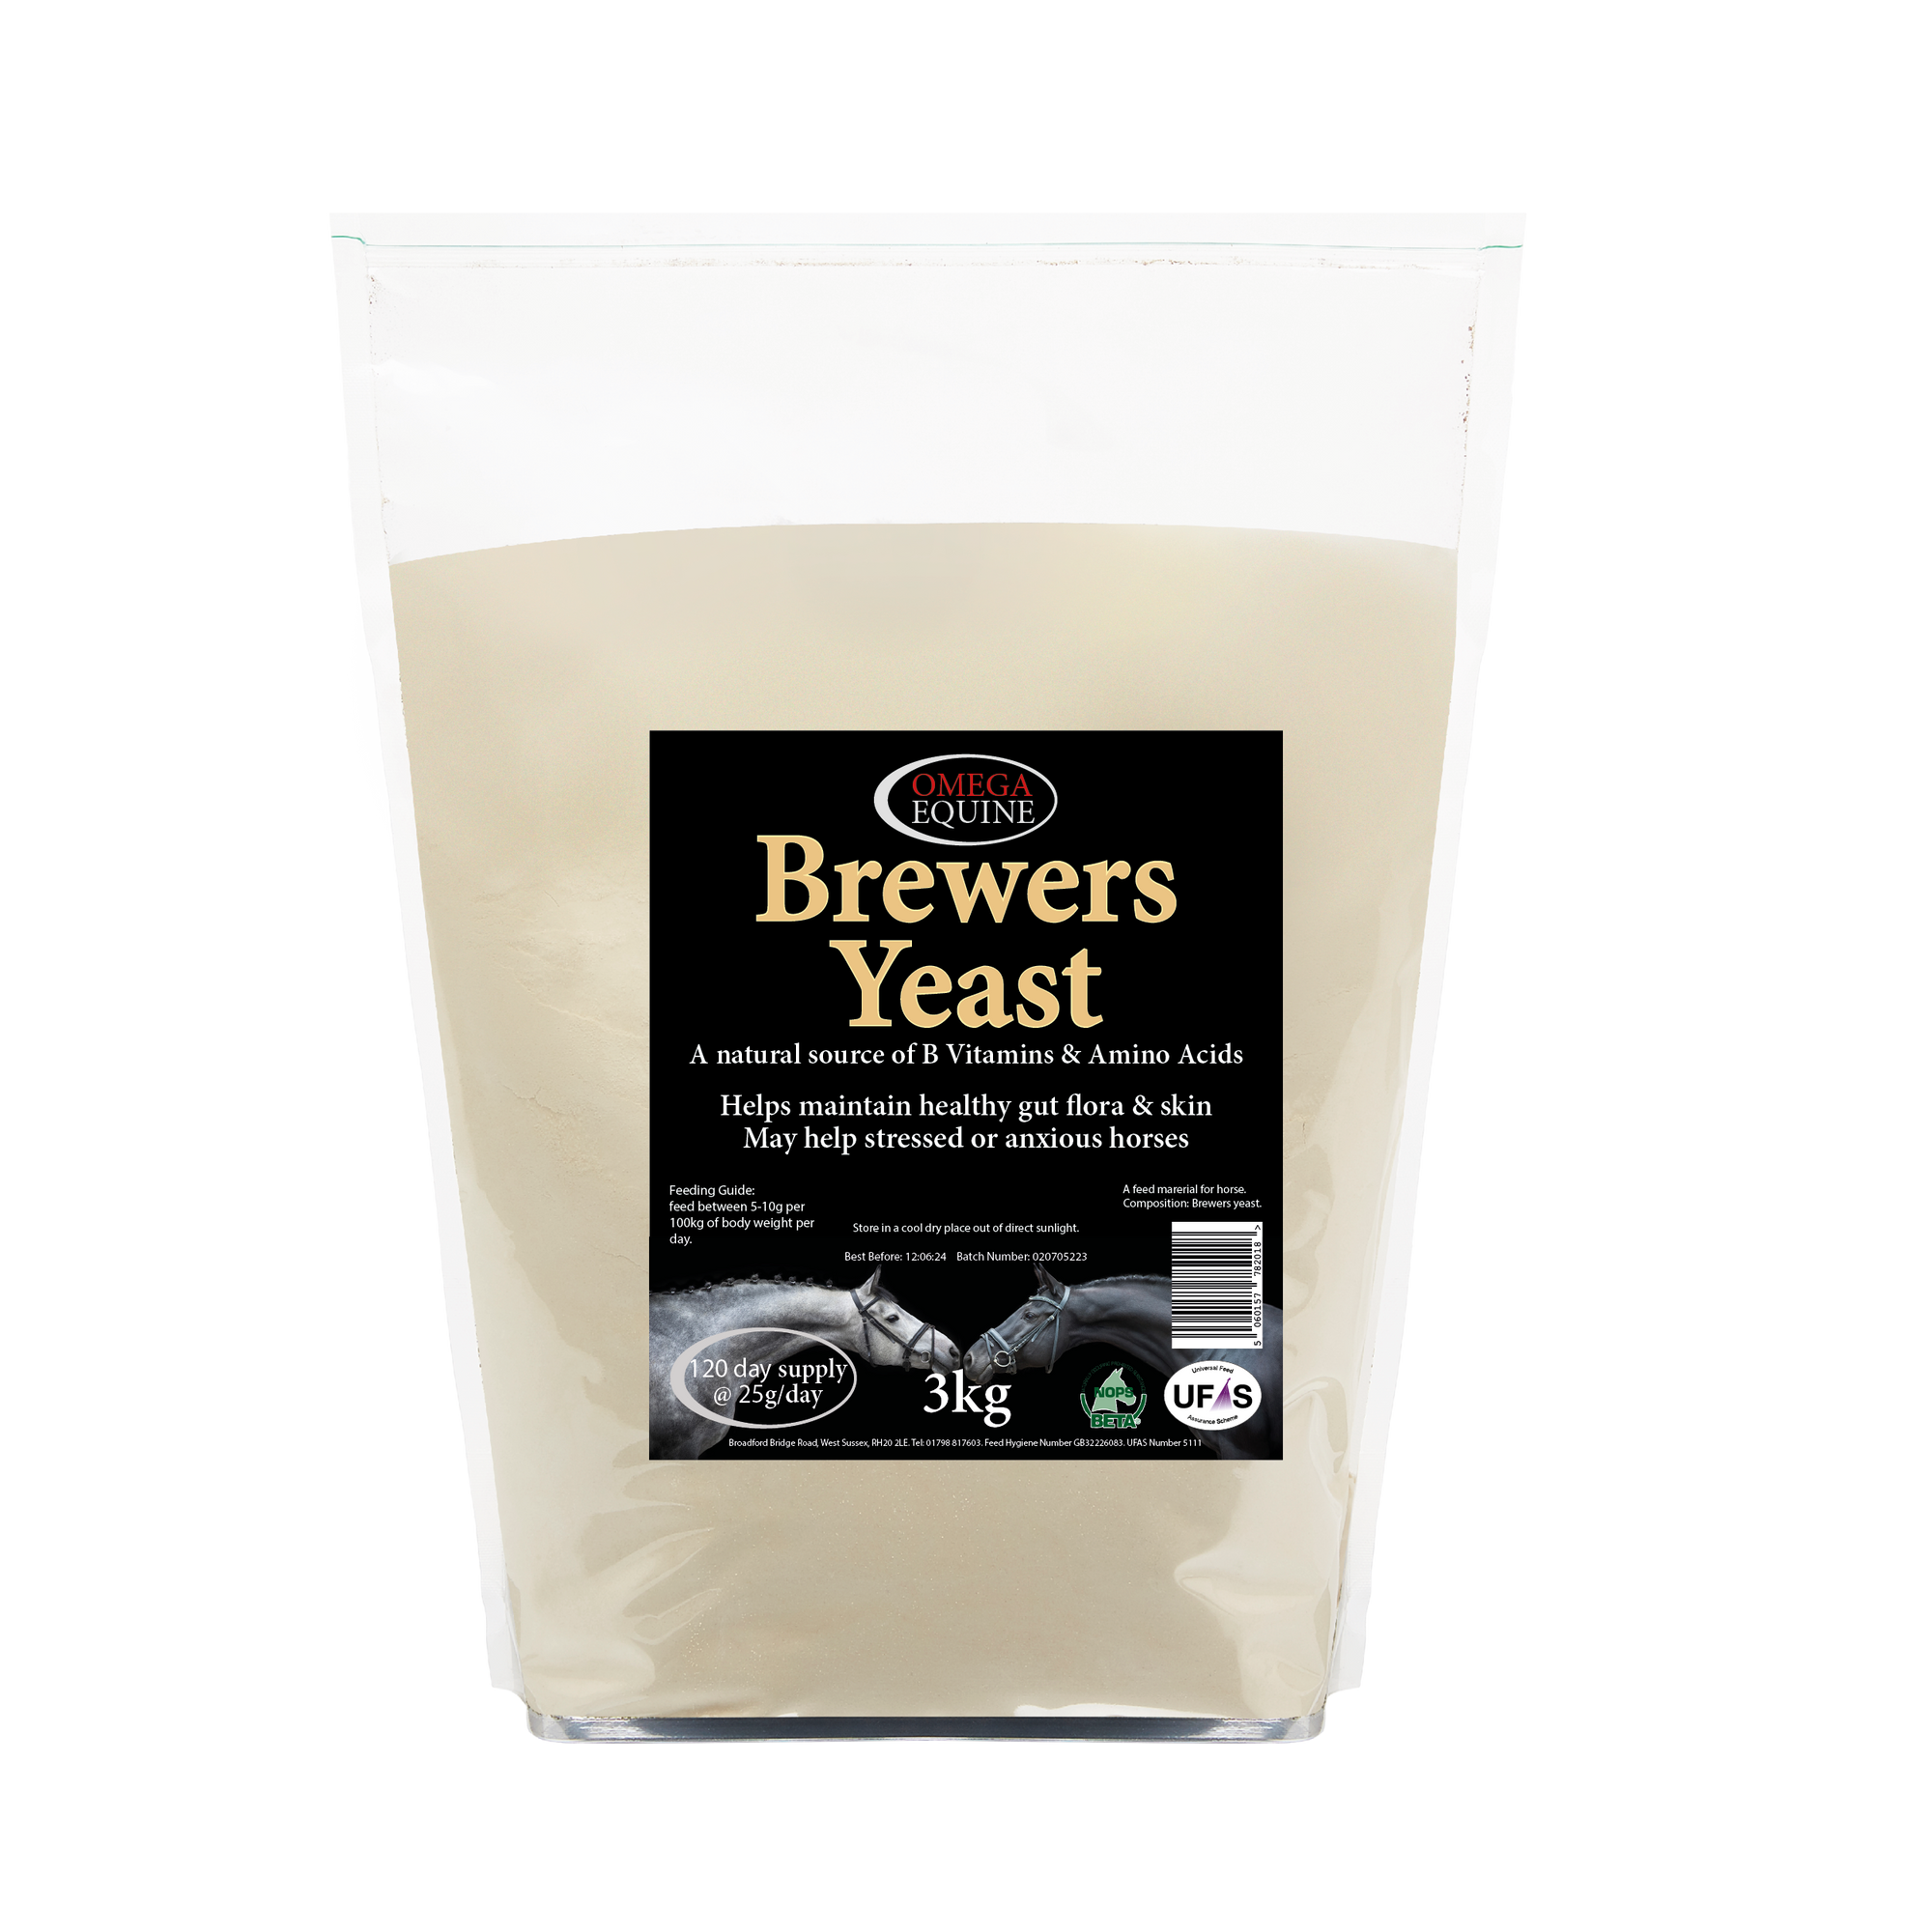 Omega Brewers Yeast